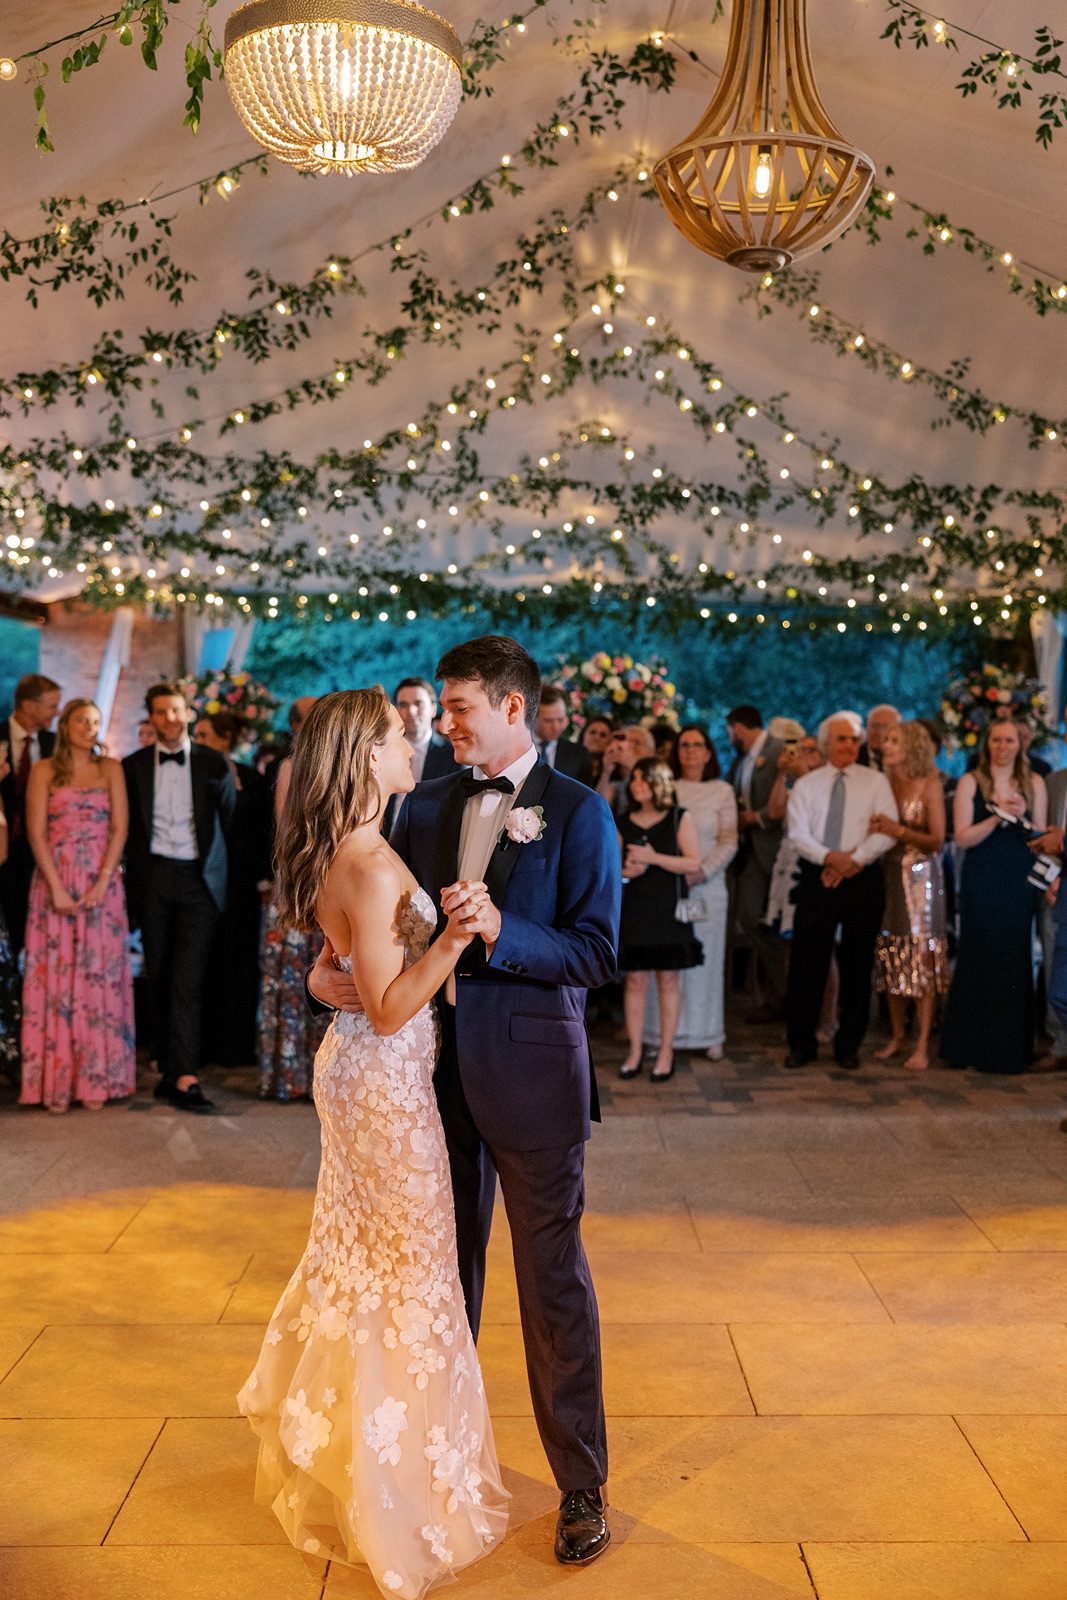 Bride and groom have first dance at the Chicago Botanic Garden wedding reception